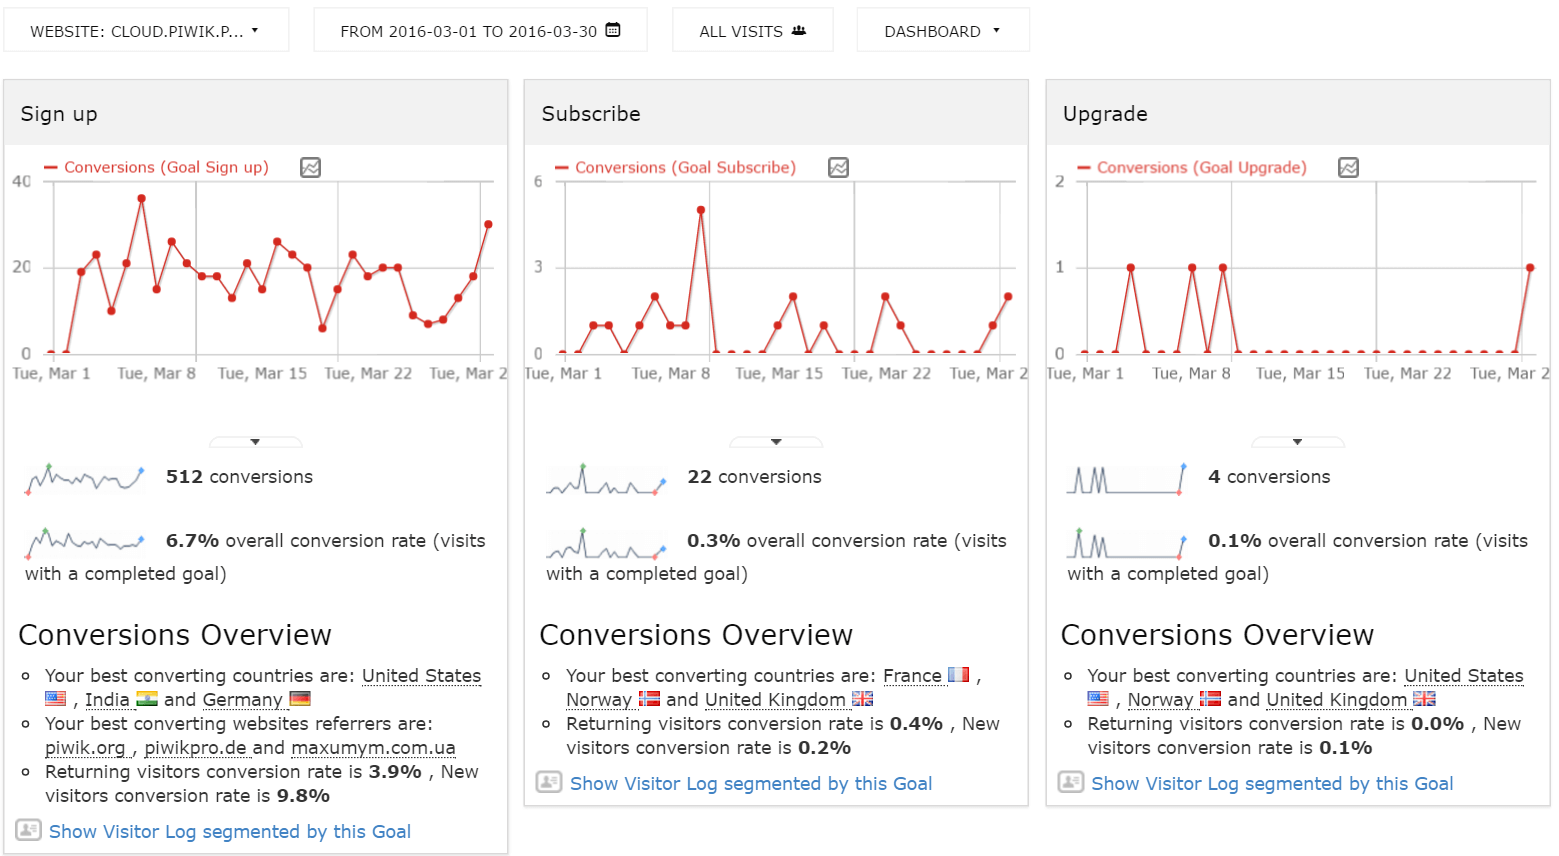 KPIs and Comparsion Dashboard